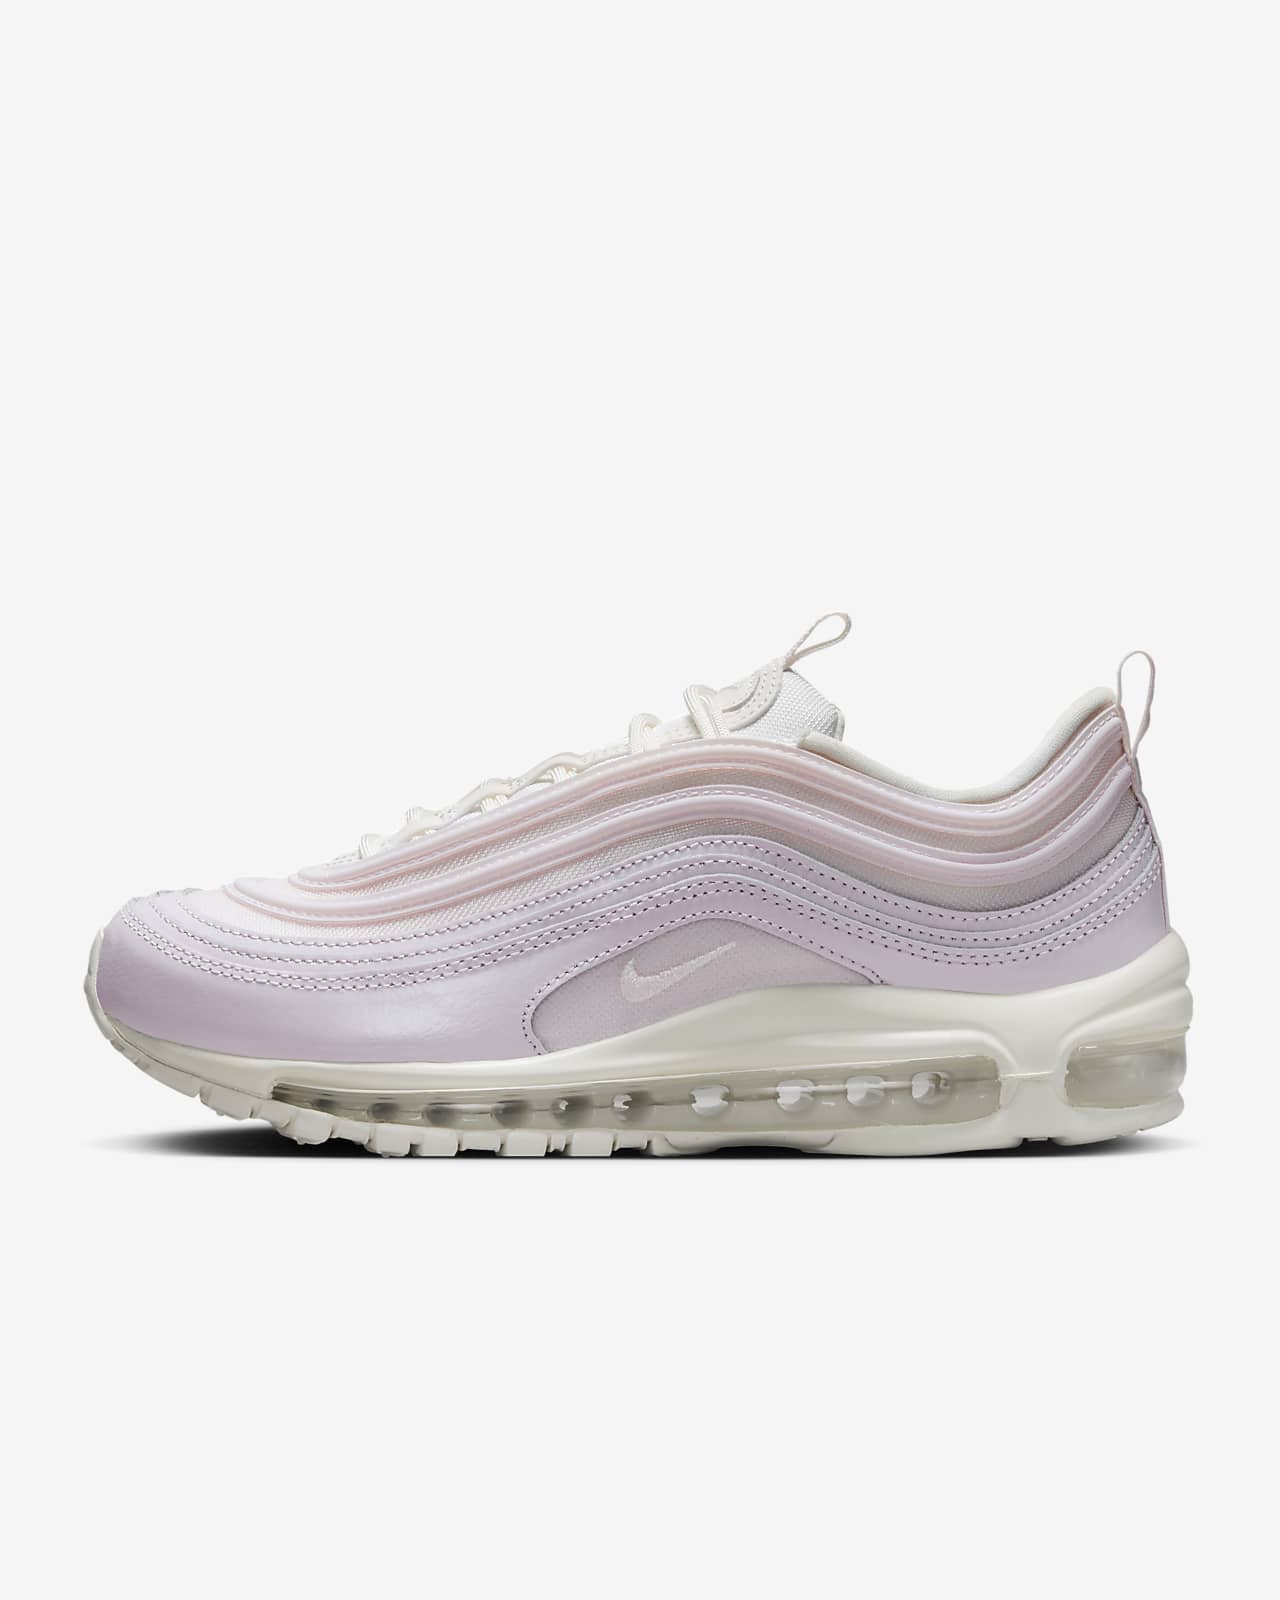 bilayer Constricted God Nike Air Max 97 Women's Shoes. Nike BG